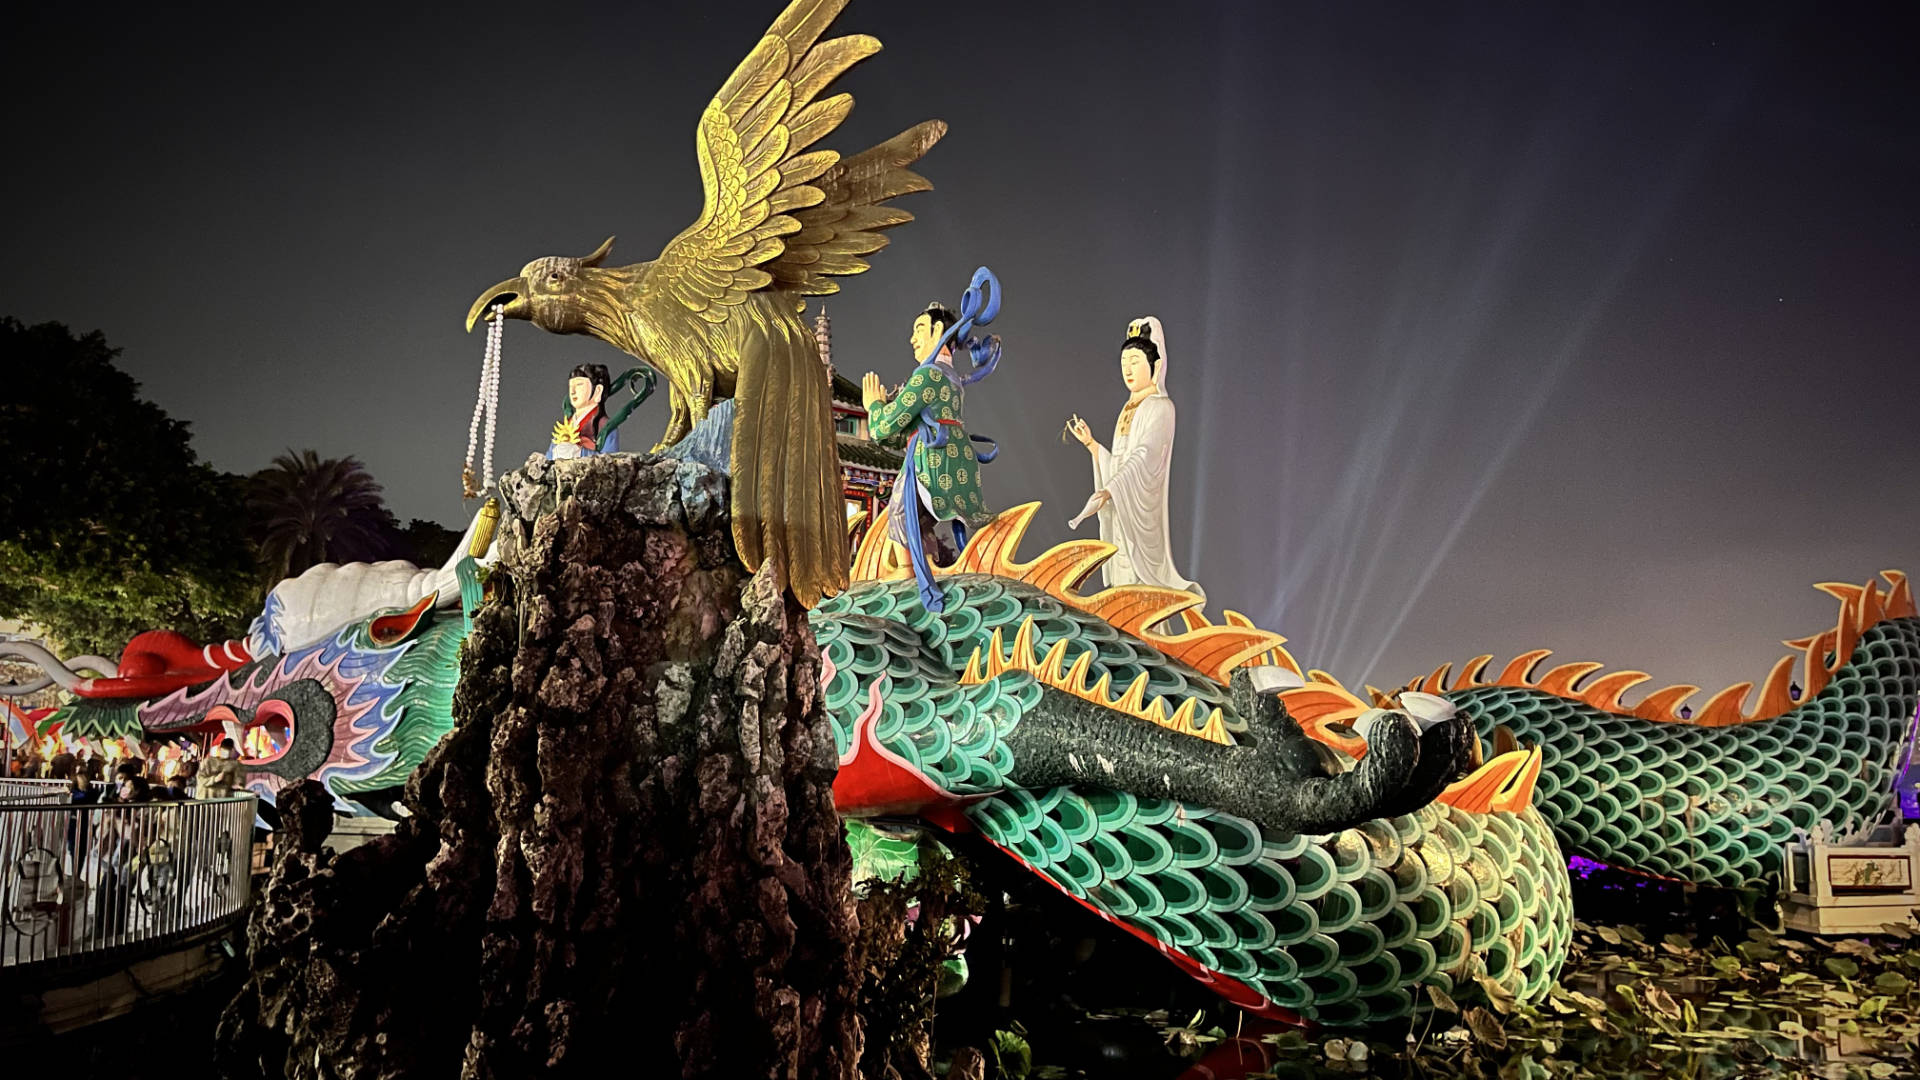 Colorful statue of Guanyin riding a dragon at Lotus Pond.